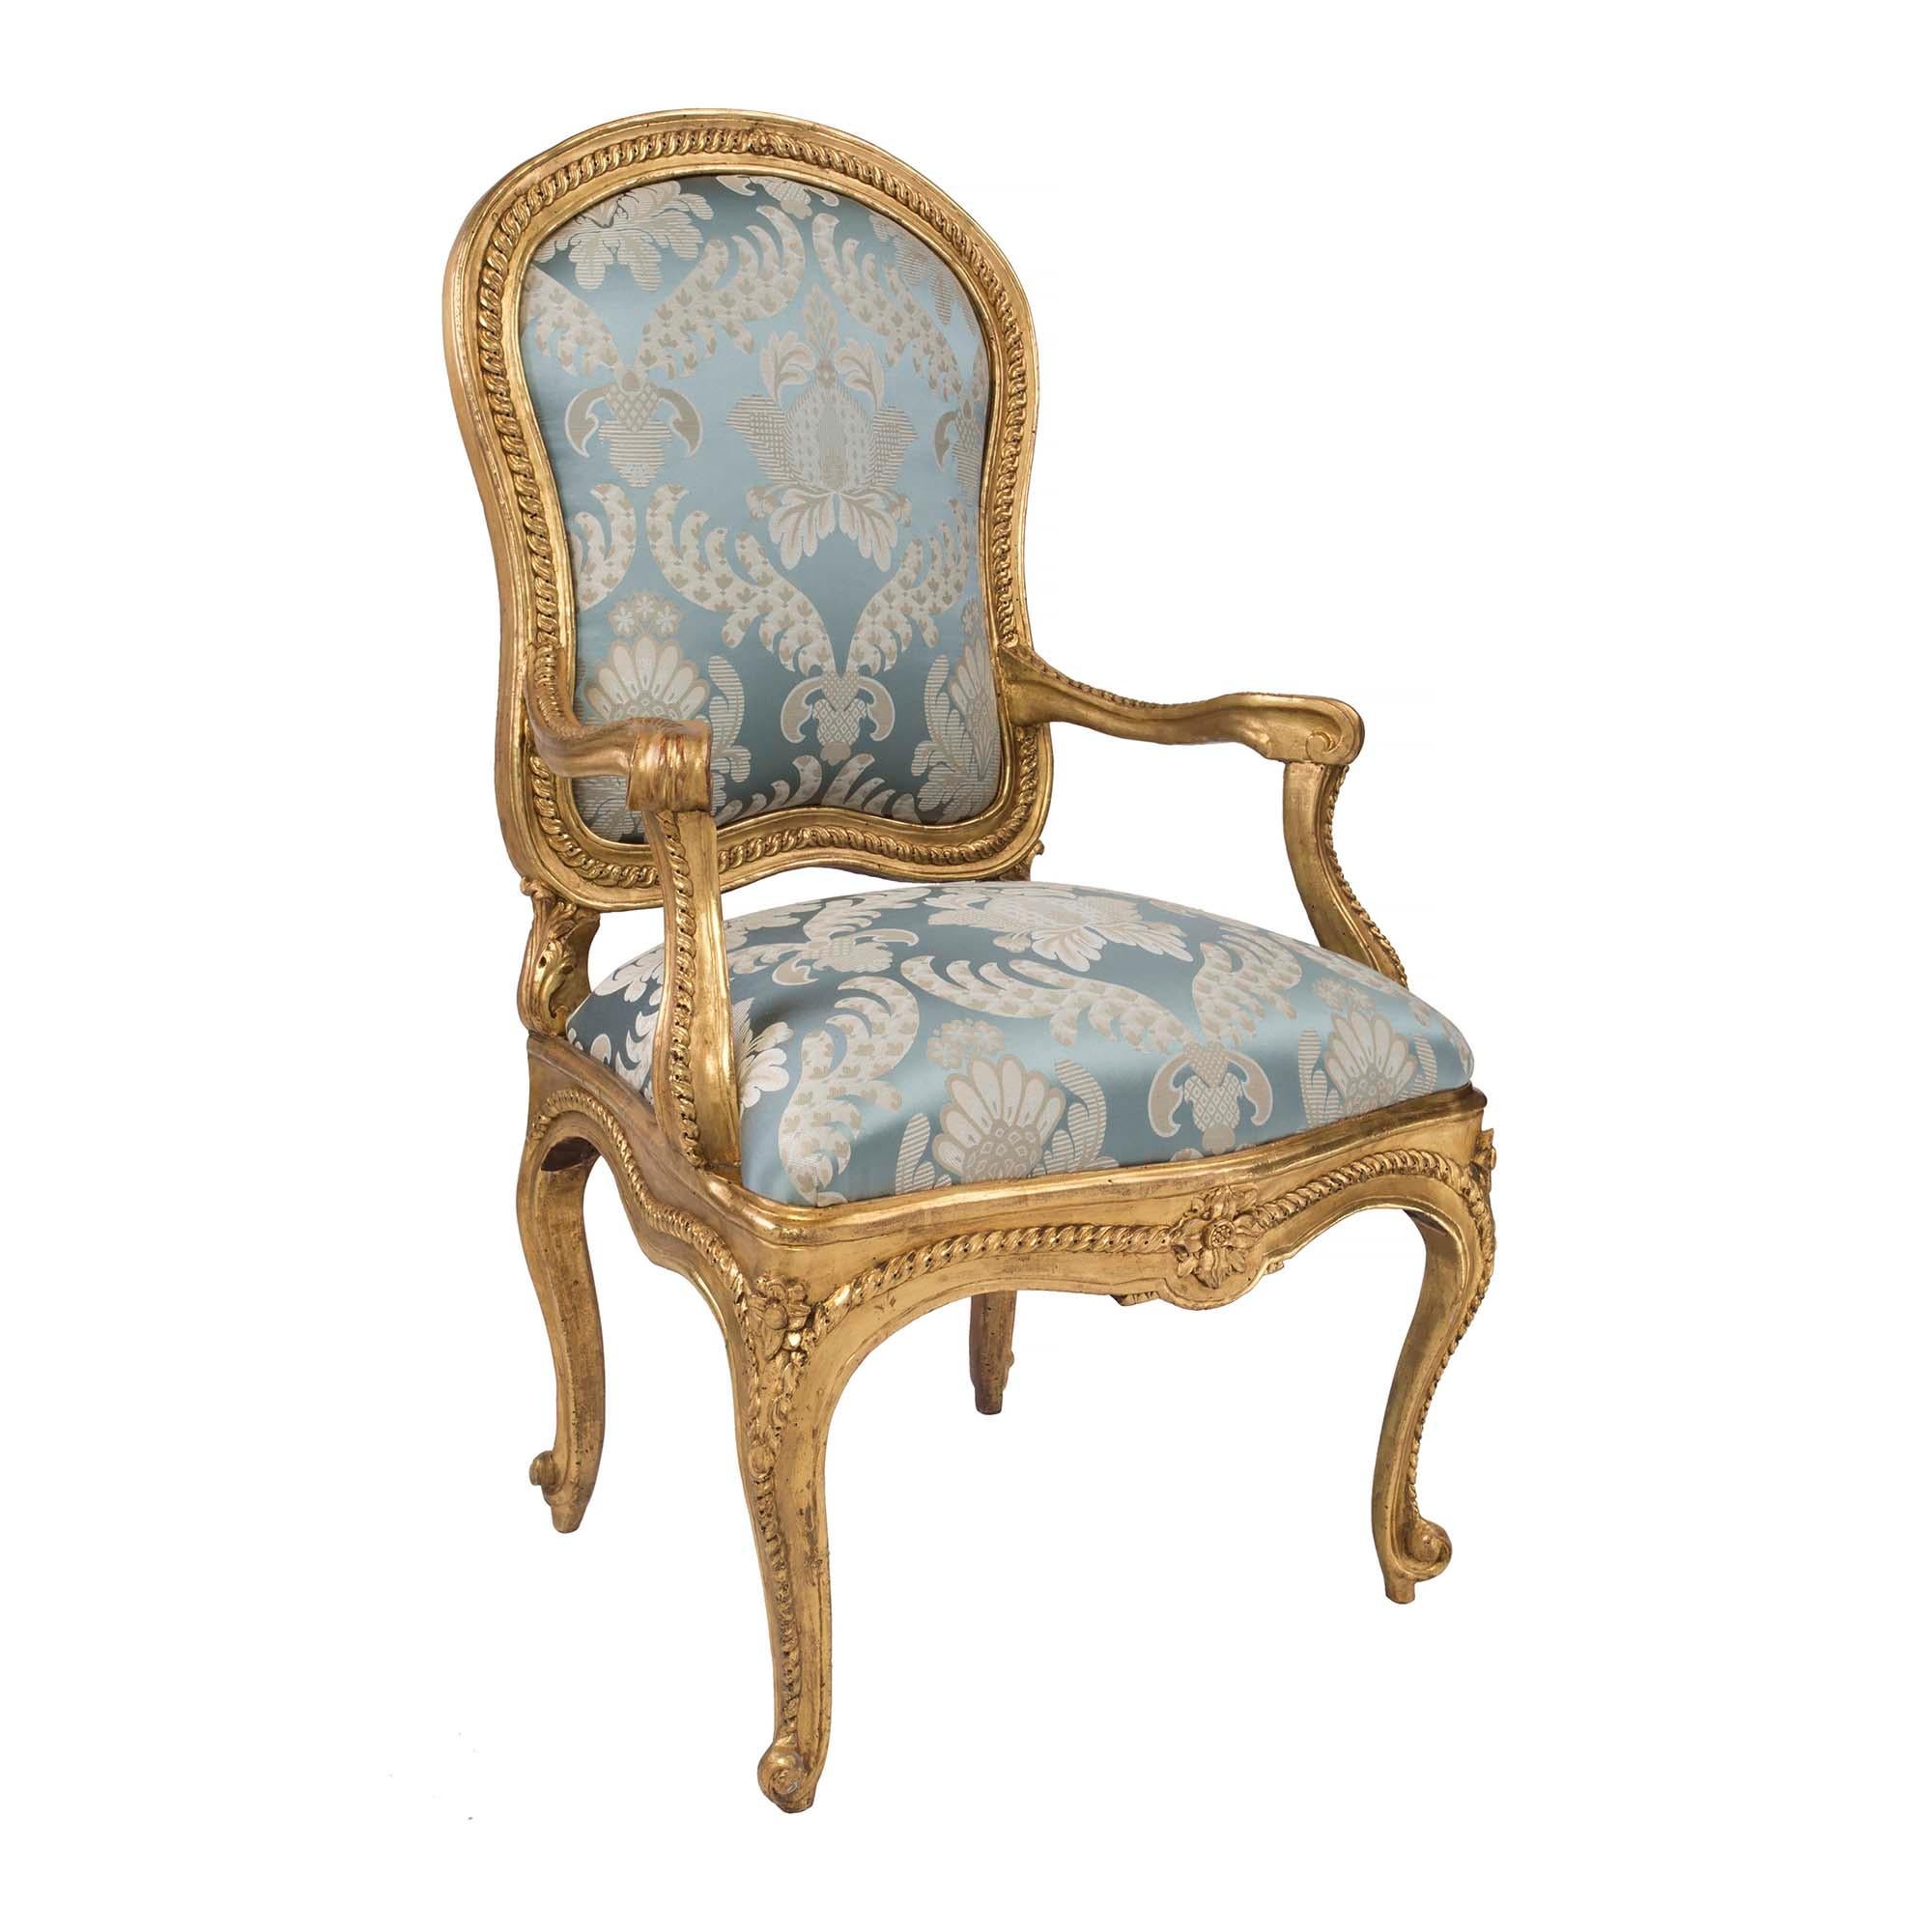 A sensational and very high-quality pair of Italian 18th century high back throne giltwood armchairs à Chassis, which signifies that the upholstery is easily removed and changed for every season. The pair of Genovese armchairs are raised by elegant